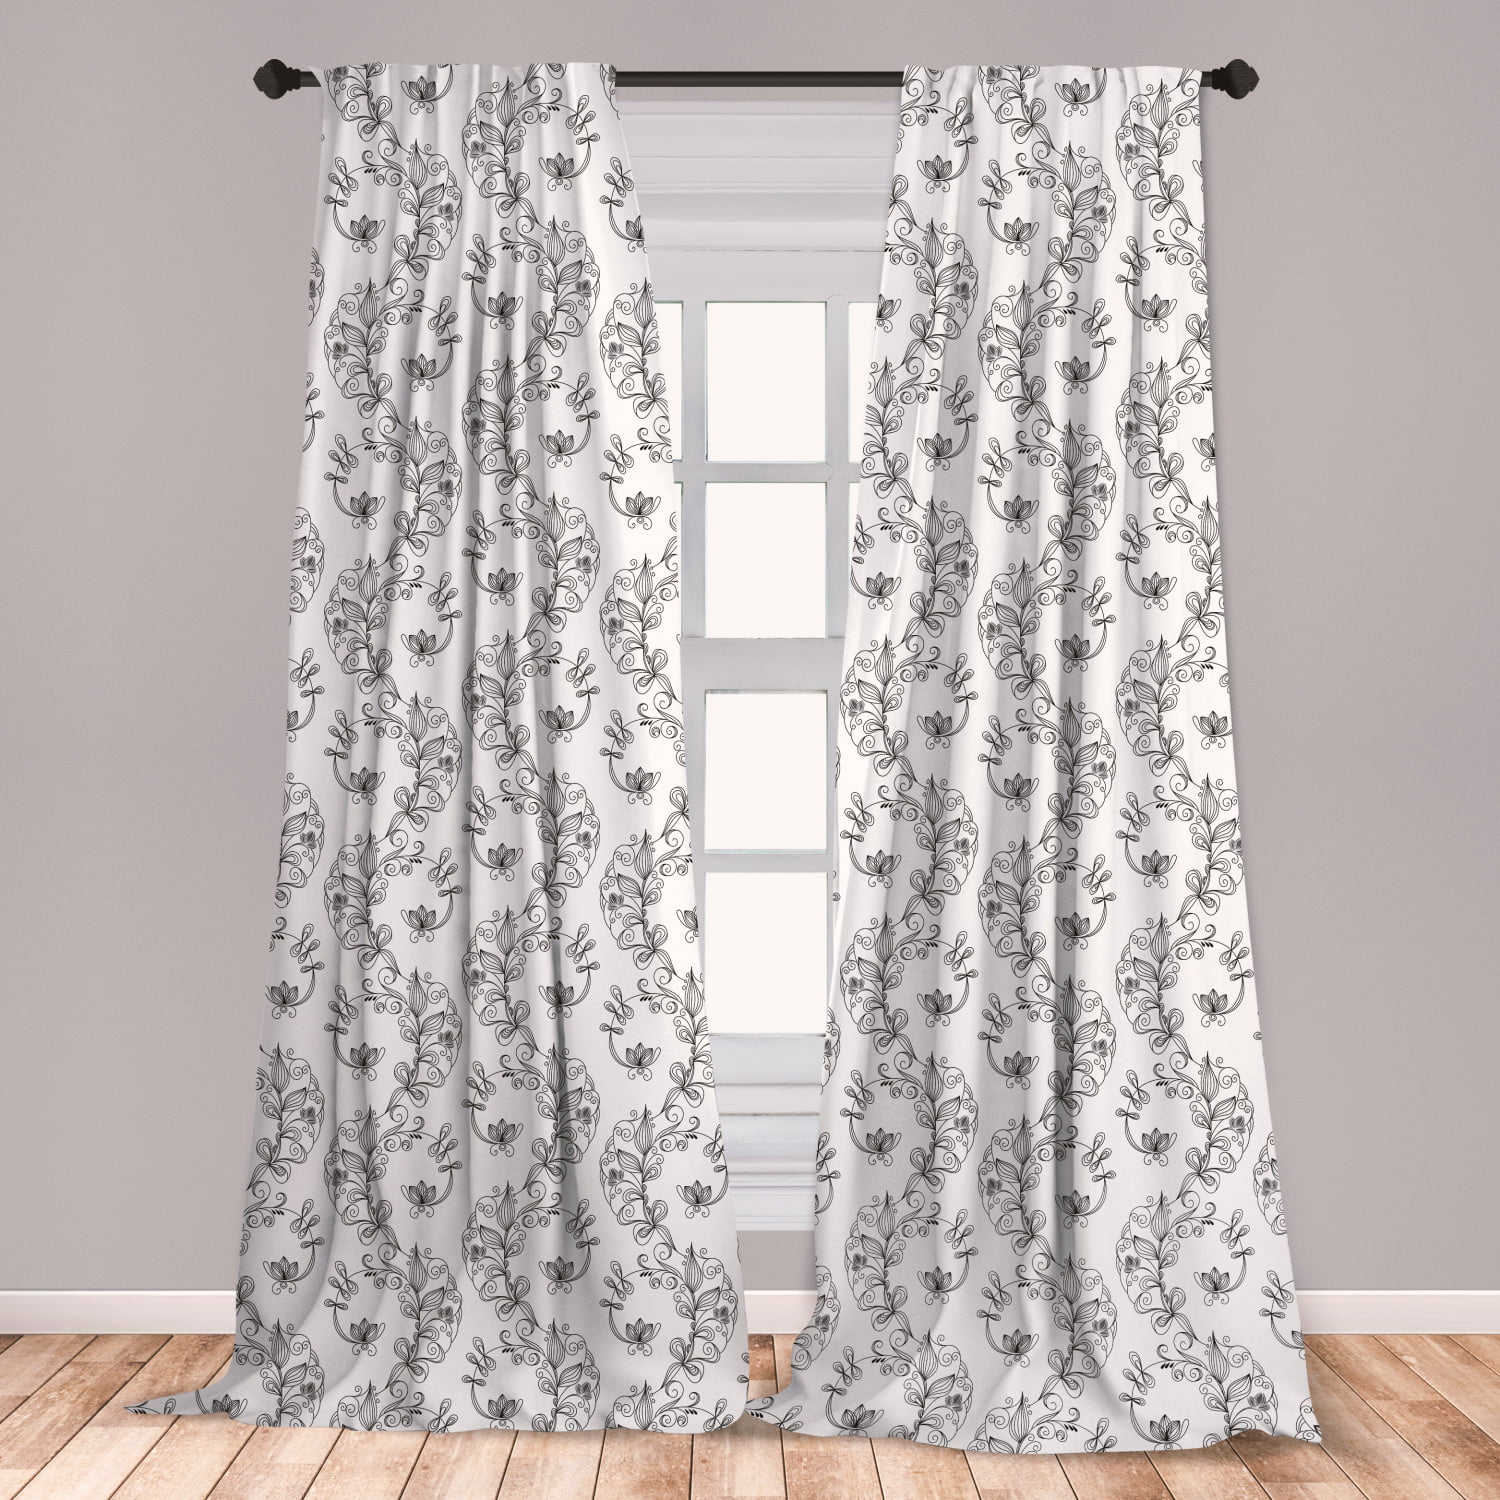 Black and White Curtains 2 Panels Set, Scroll and Swirls Pattern with